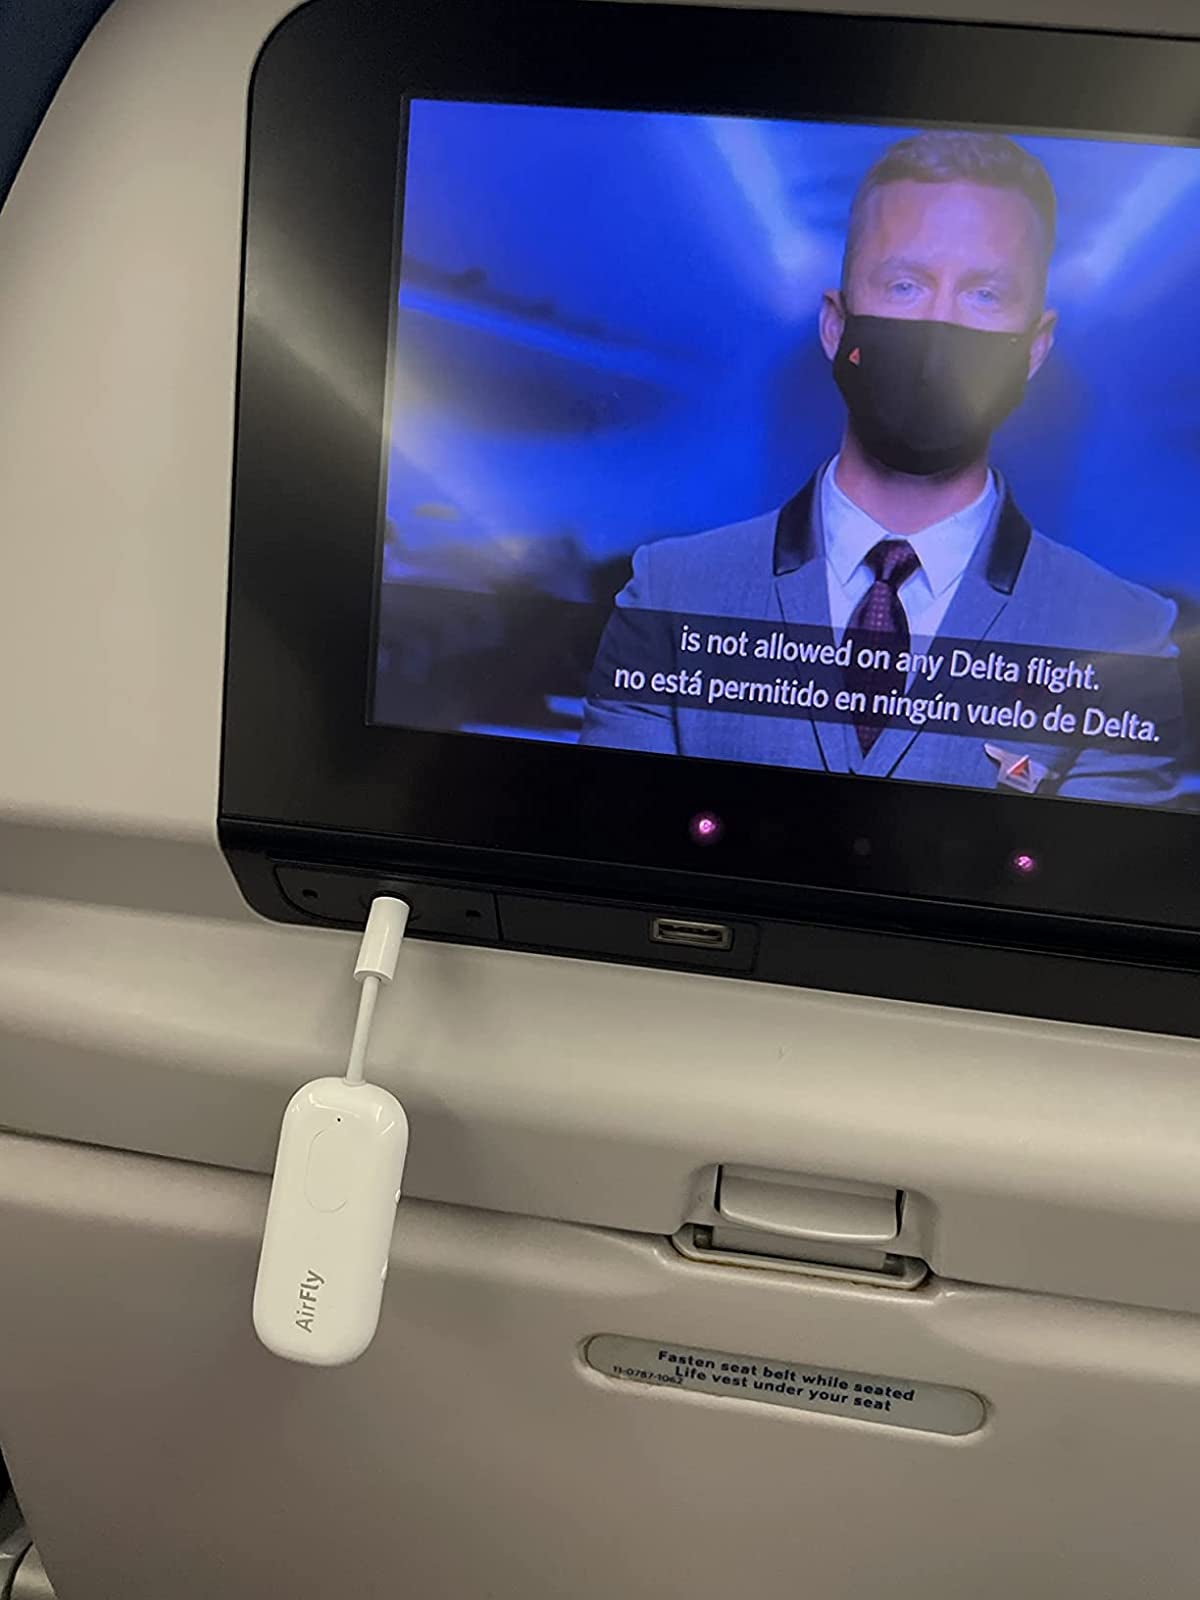 I apologize for the pic, but this is a BevLedge and I think its awesome.  When unfolded, it fits into the window shade slot on most airplanes. This  post has been taken down elsewhere because apparently self-promotion  means you can't talk about products (its